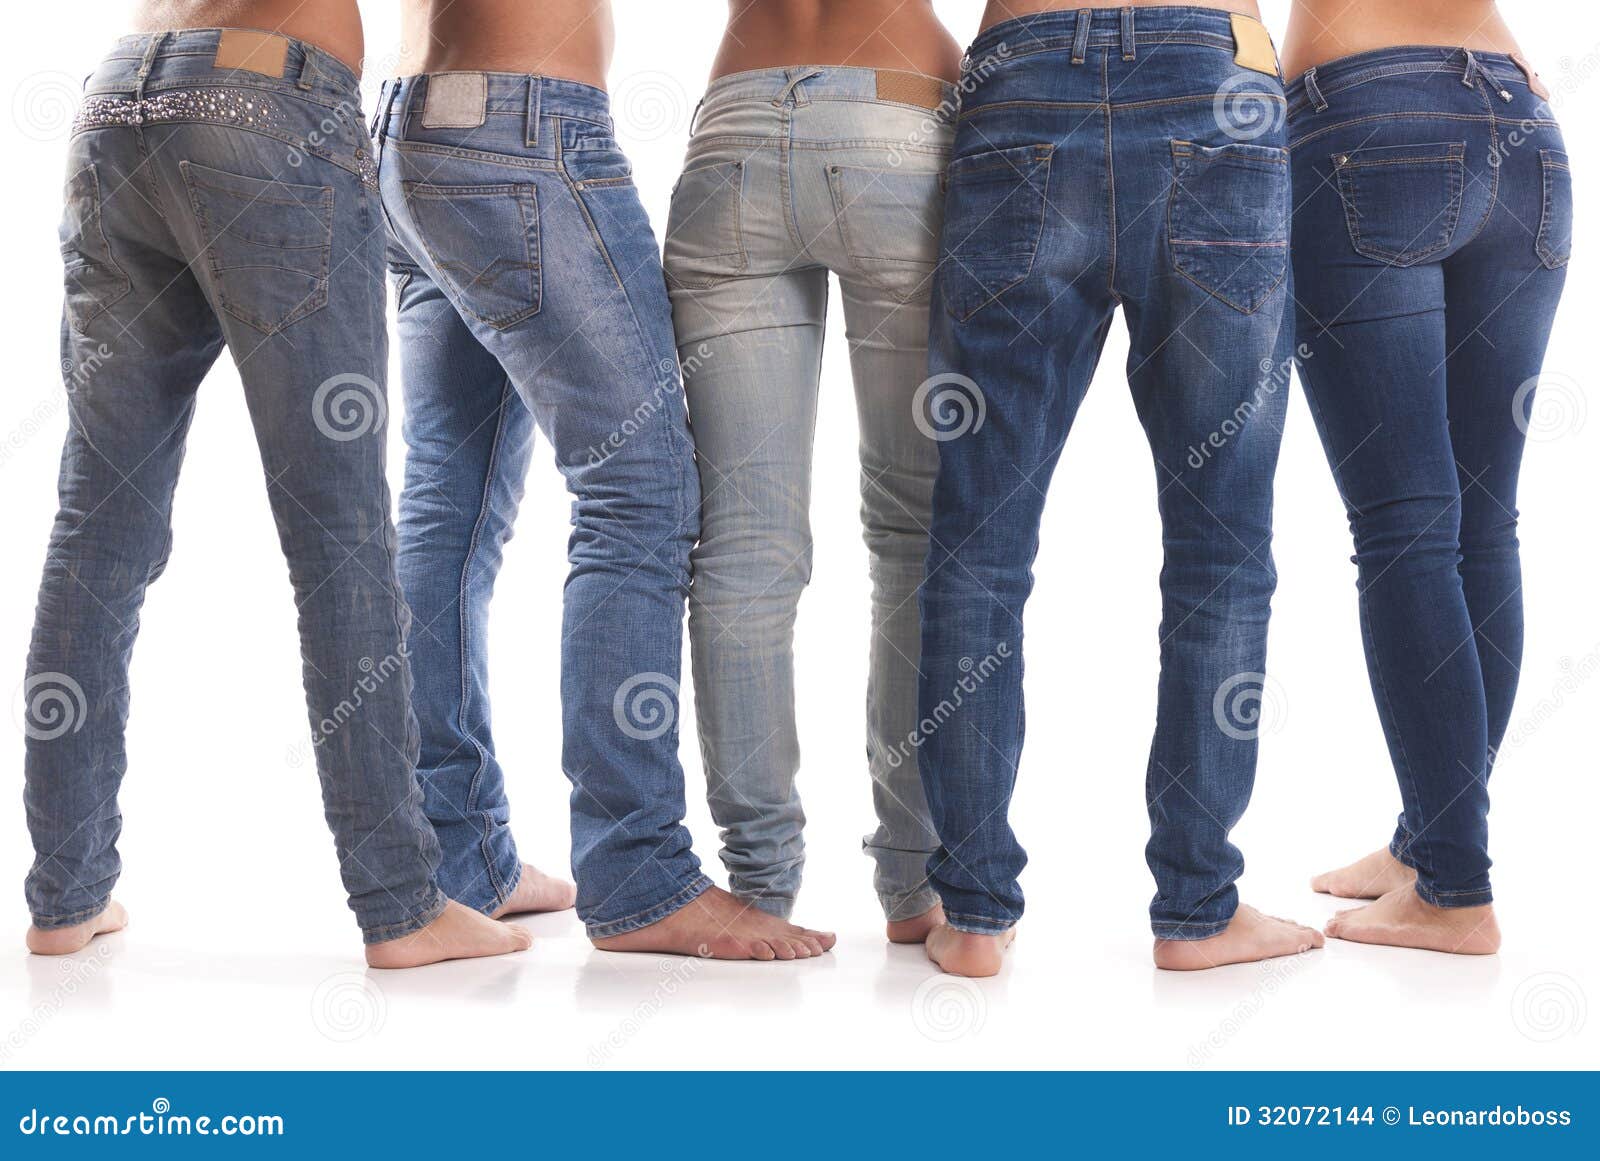 Group of jeans from back stock photo. Image of human - 32072144